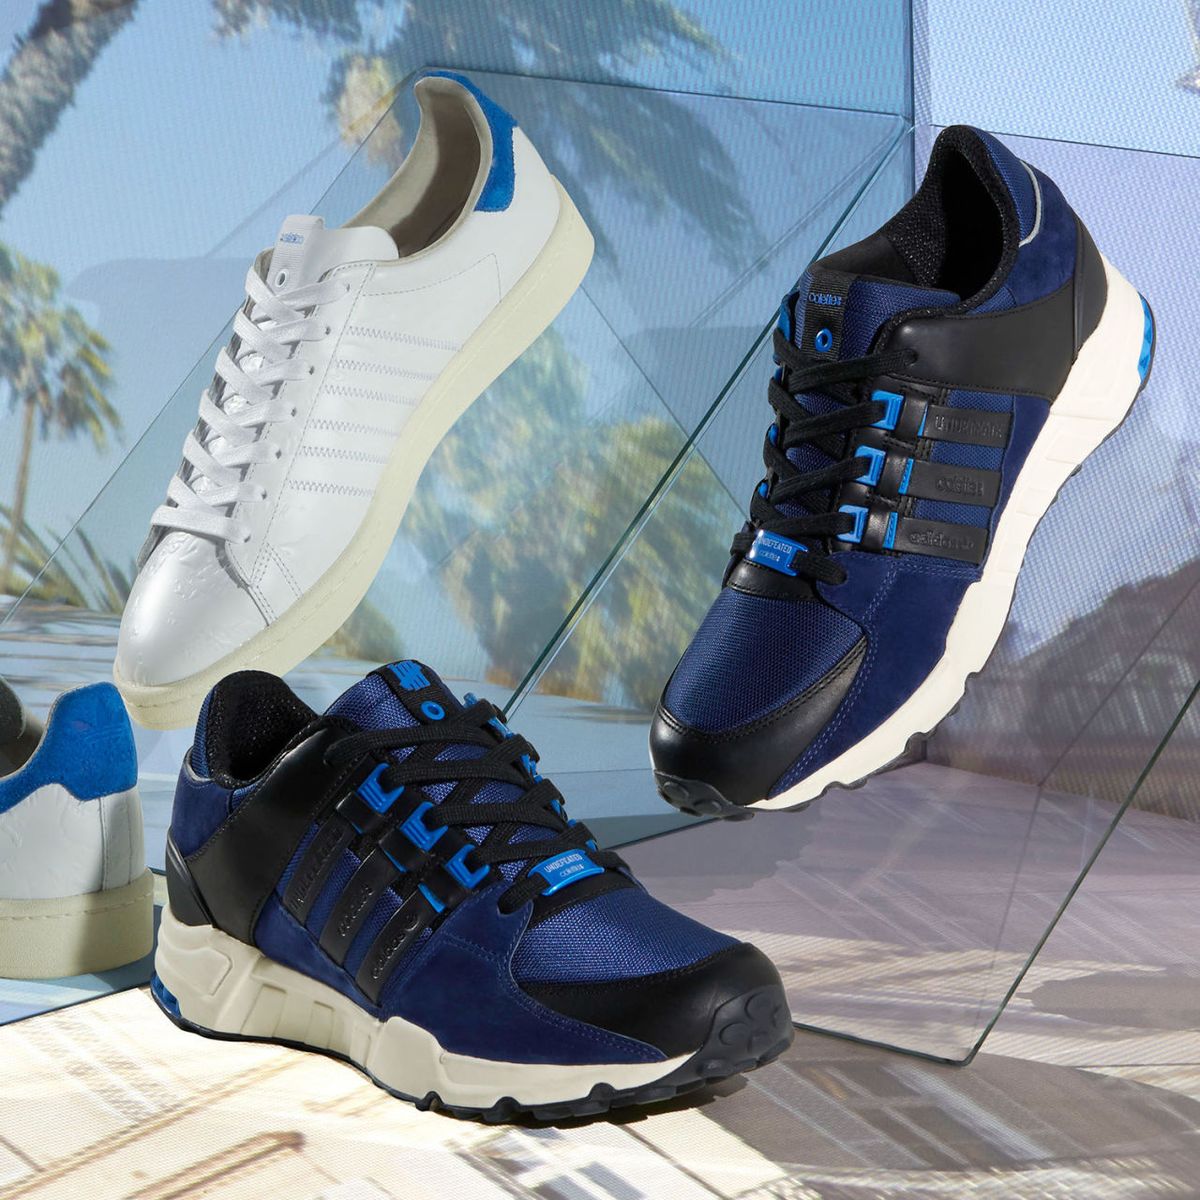 Adidas Consortium Colette x Undefeated - Where to Buy the Adidas EQT Support and Campus 80